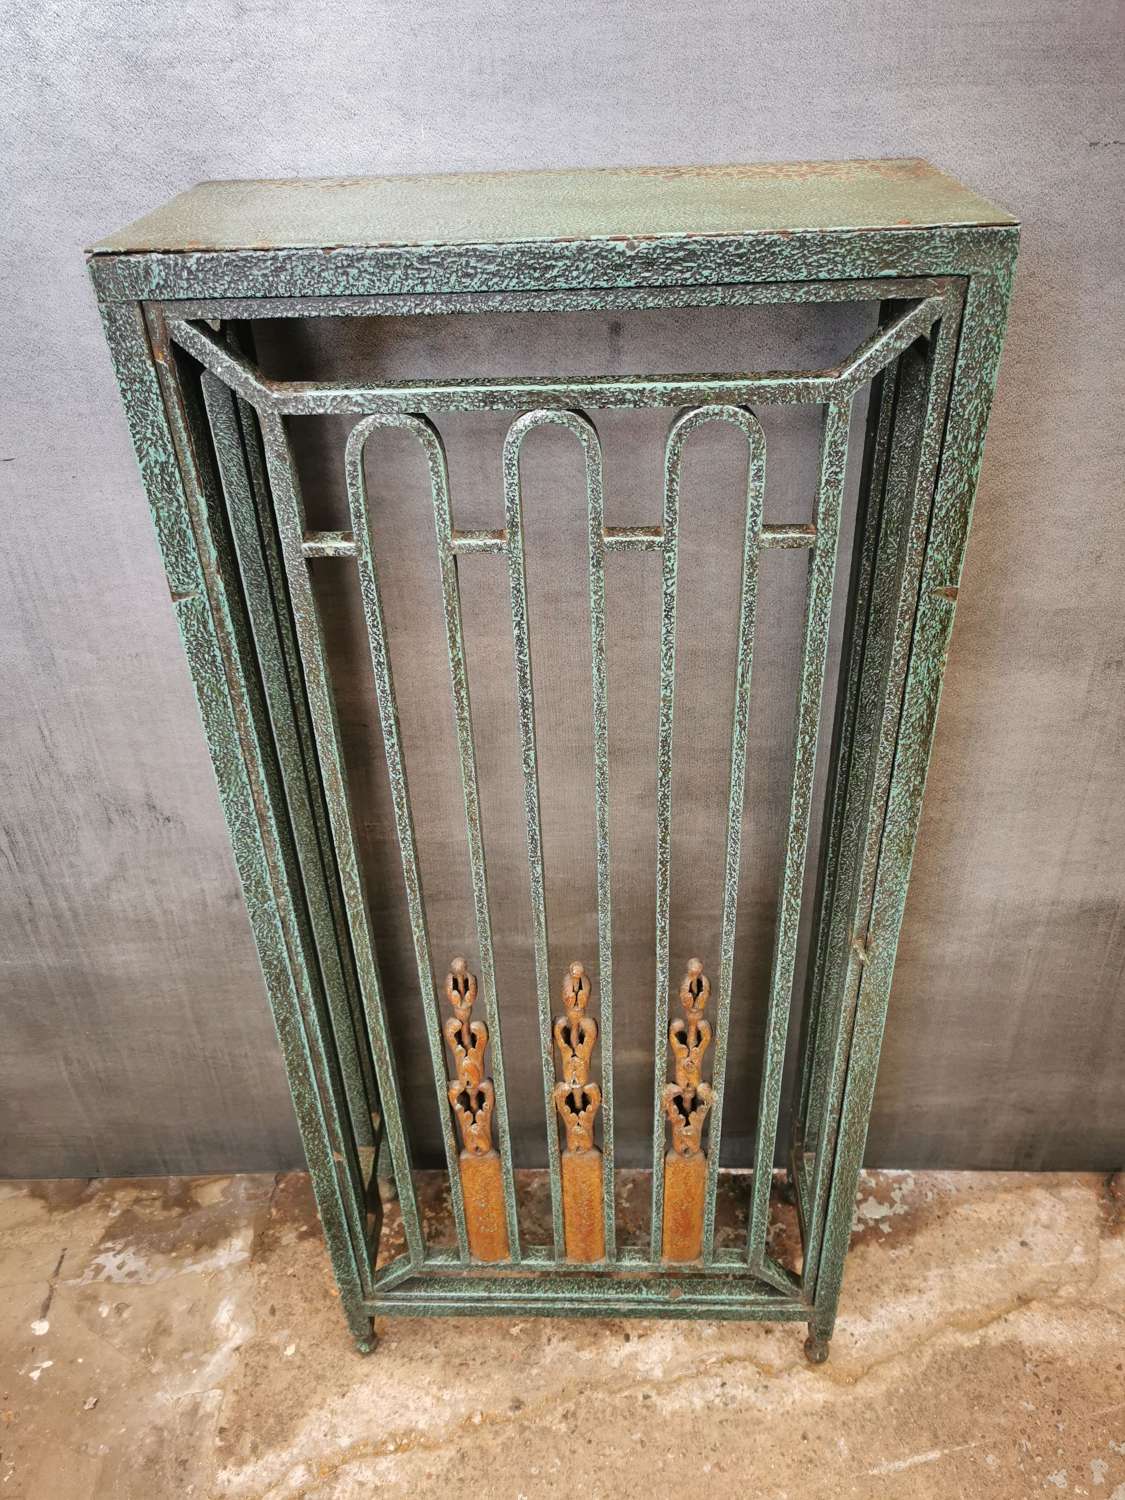 An early 20th century or late 19th green enamel painted radiator cover